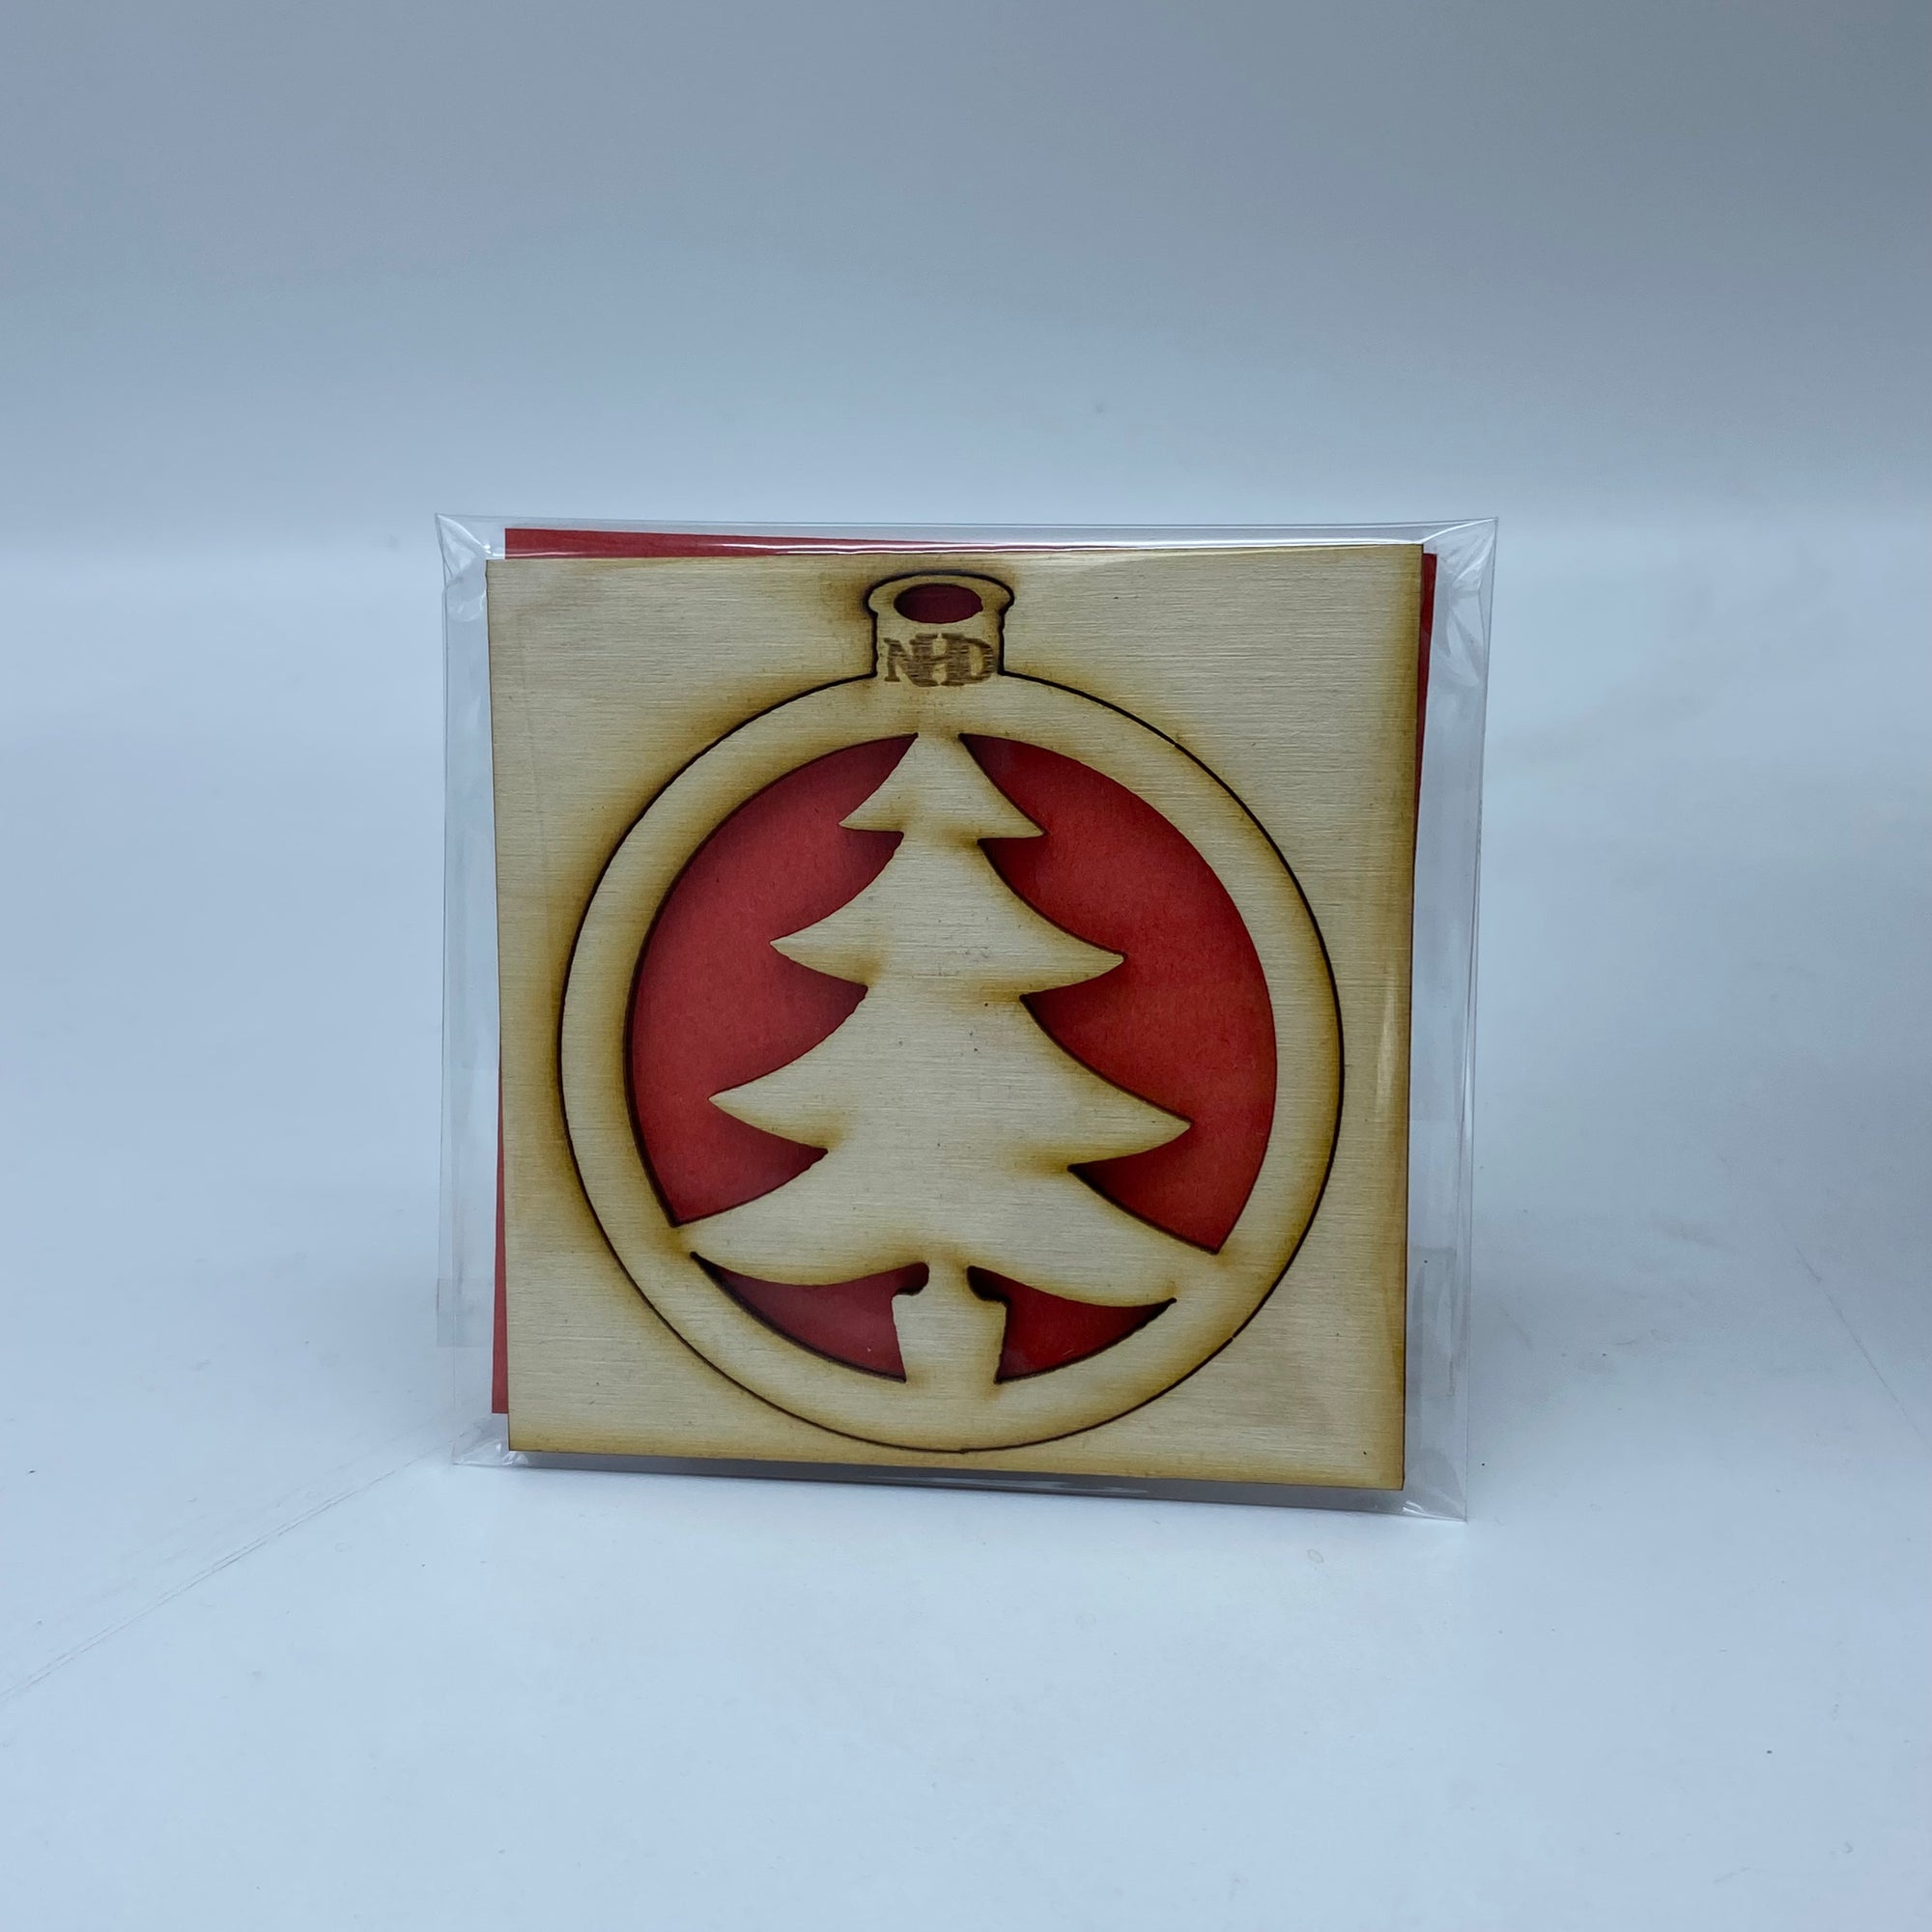 Simple tree ornament - Northern Heart Designs